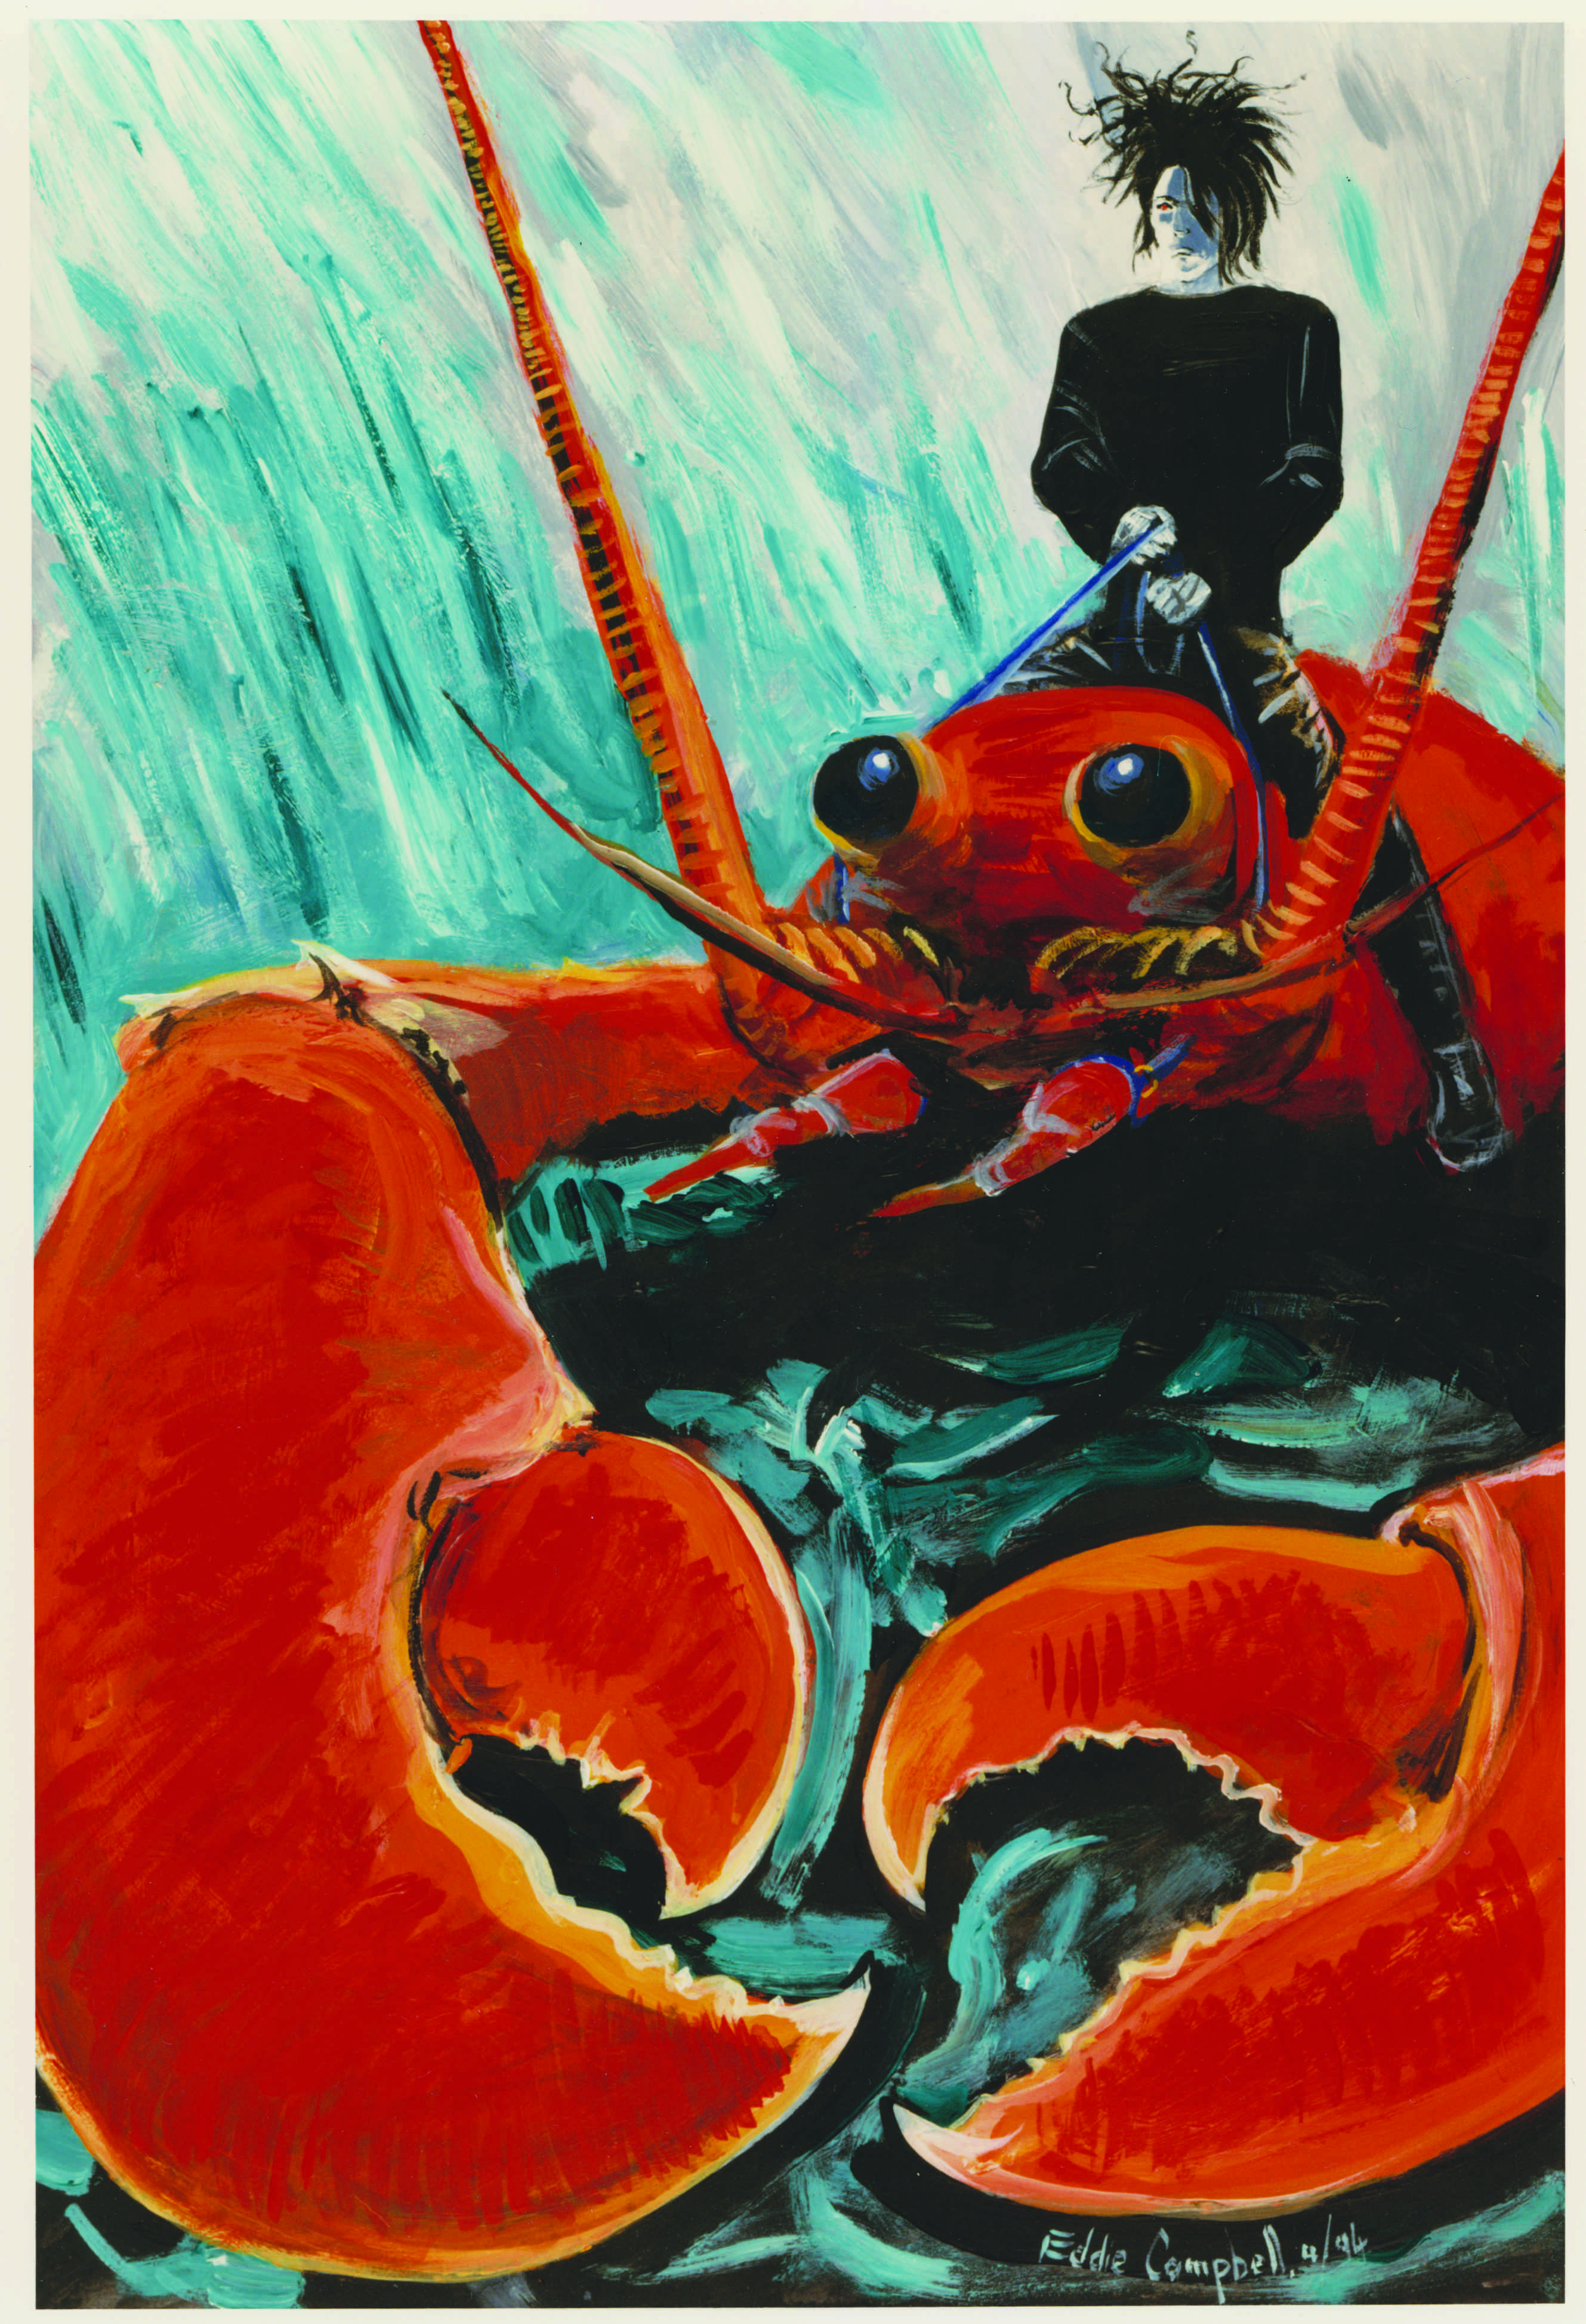 "Dream Riders a Lobster" Eddie Campbell (copyright DC)